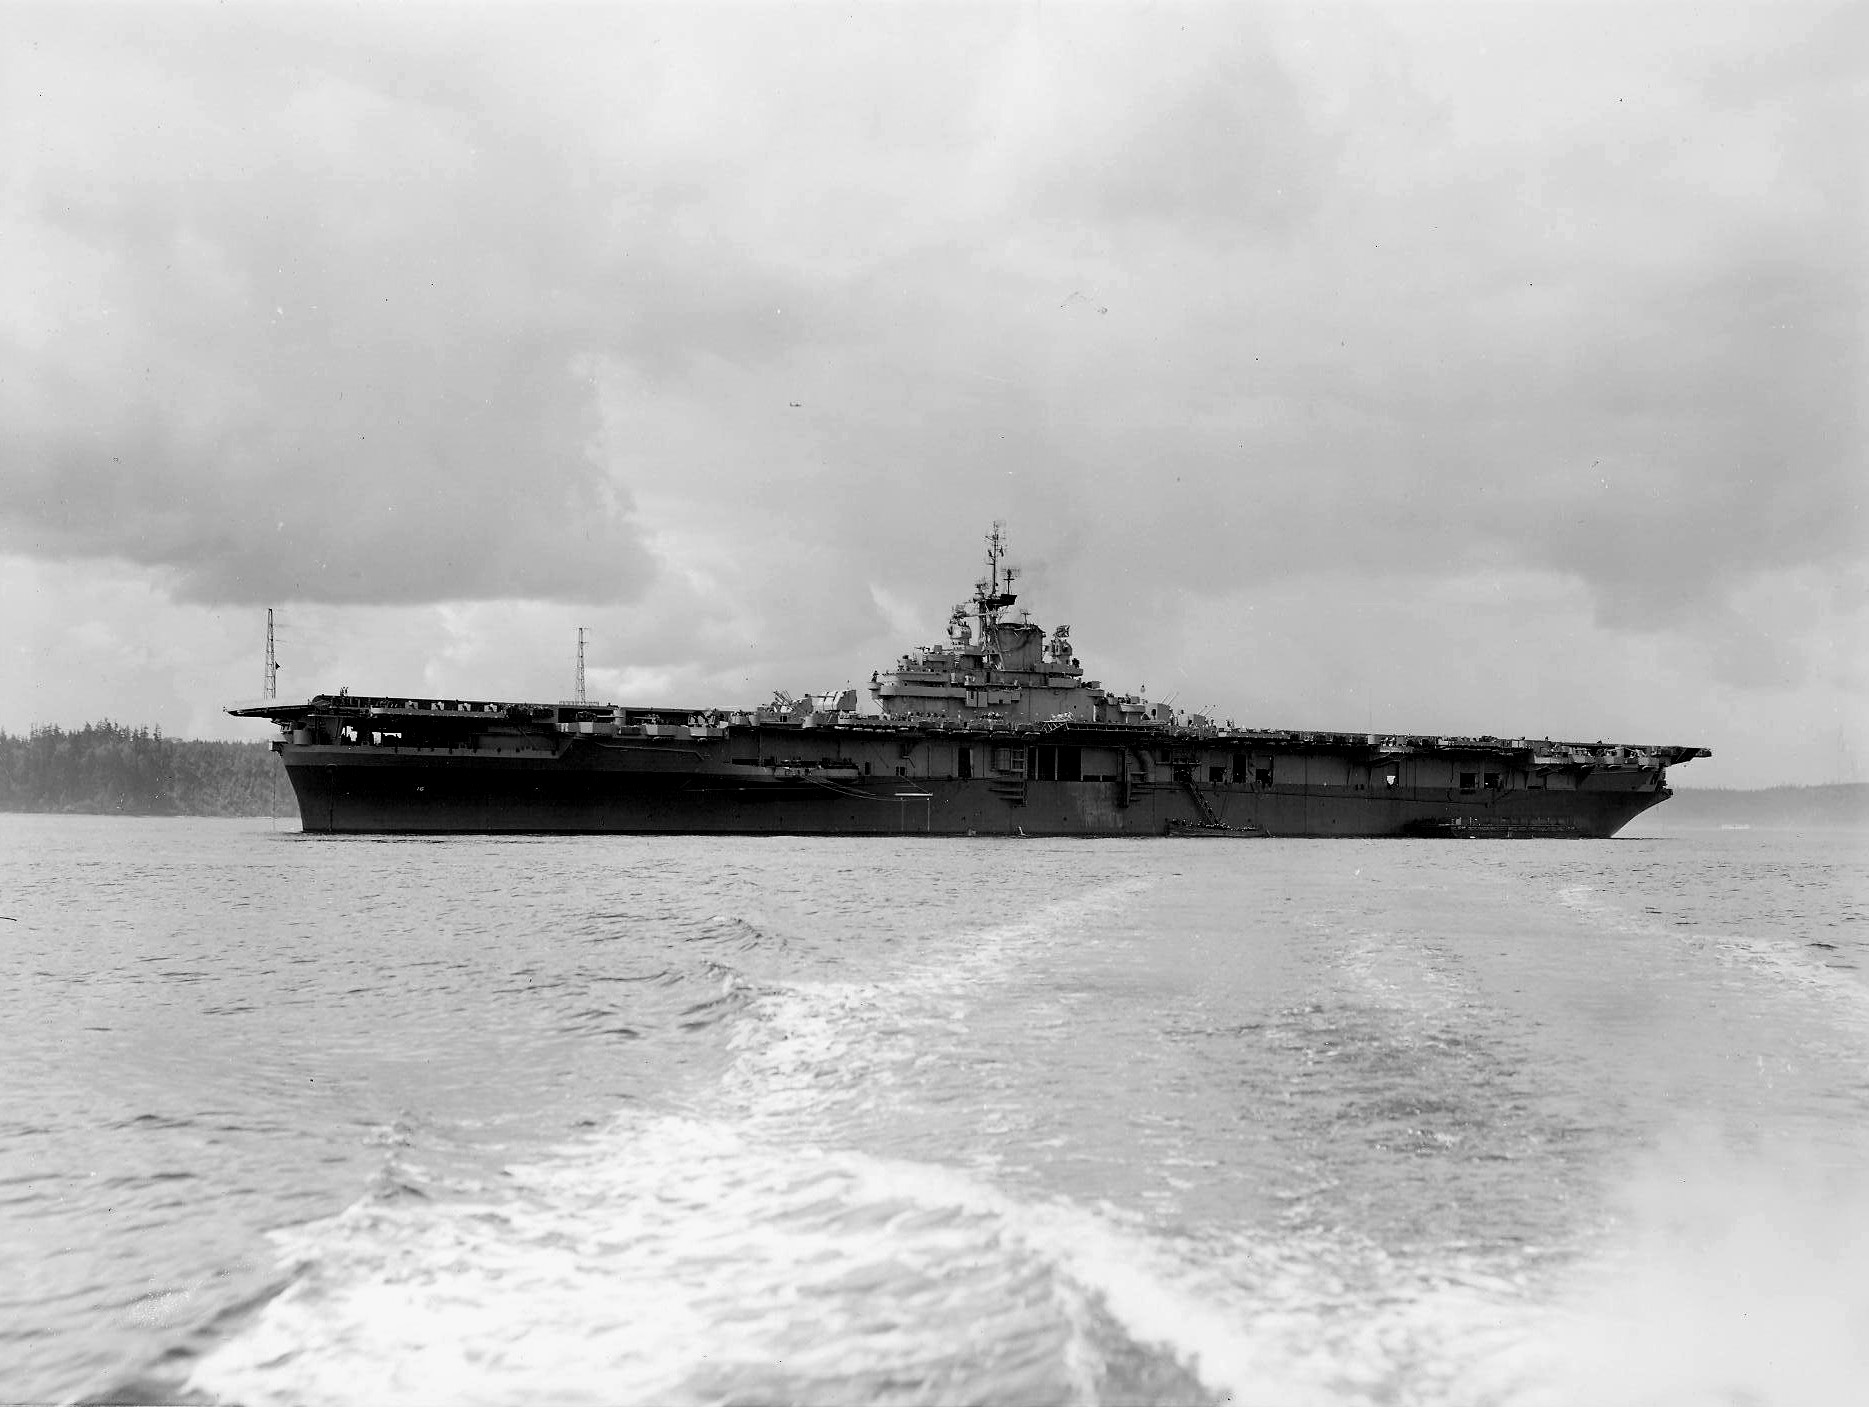 USS Lexington (Essex-class) at anchor in Puget Sound, Washington, United States, 21 May 1945 following extensive repairs at the Navy Yard in Bremerton.